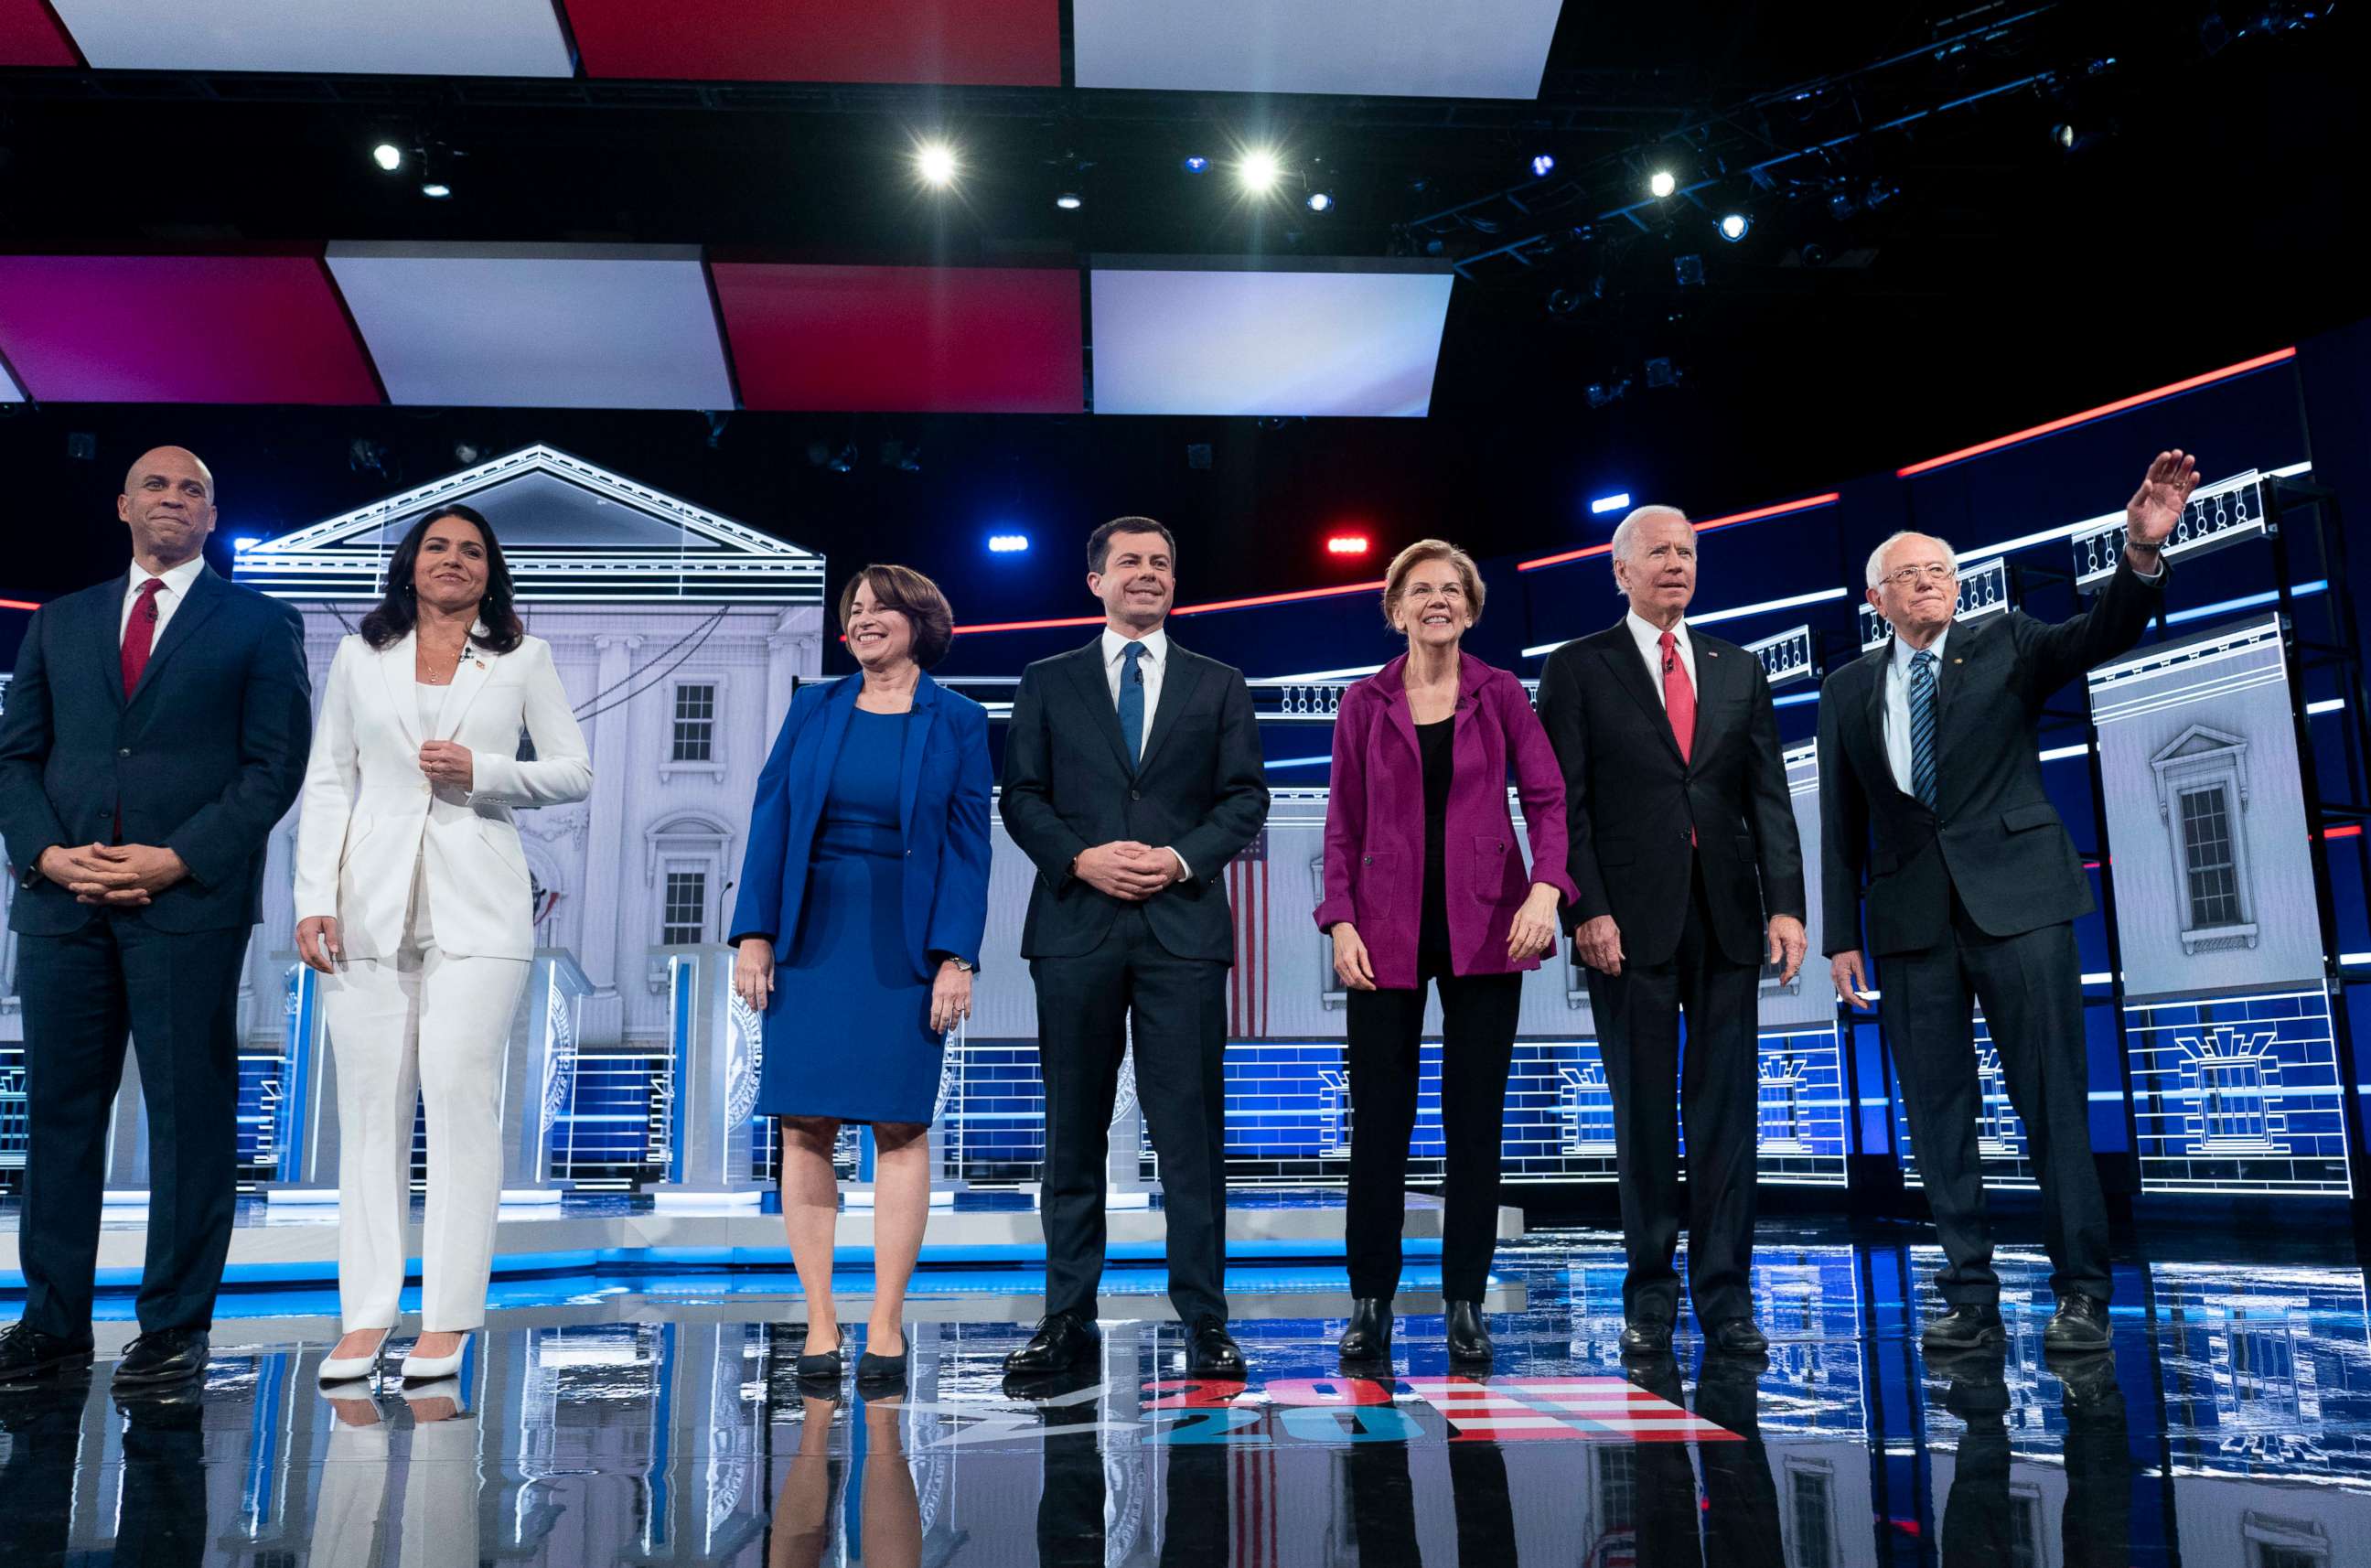 PHOTO: Presidential candidates appear on stage at the start of he Democratic presidential debate at Tyler Perry Studios on Wednesday, November 20, 2019, in Atlanta, Georgia.